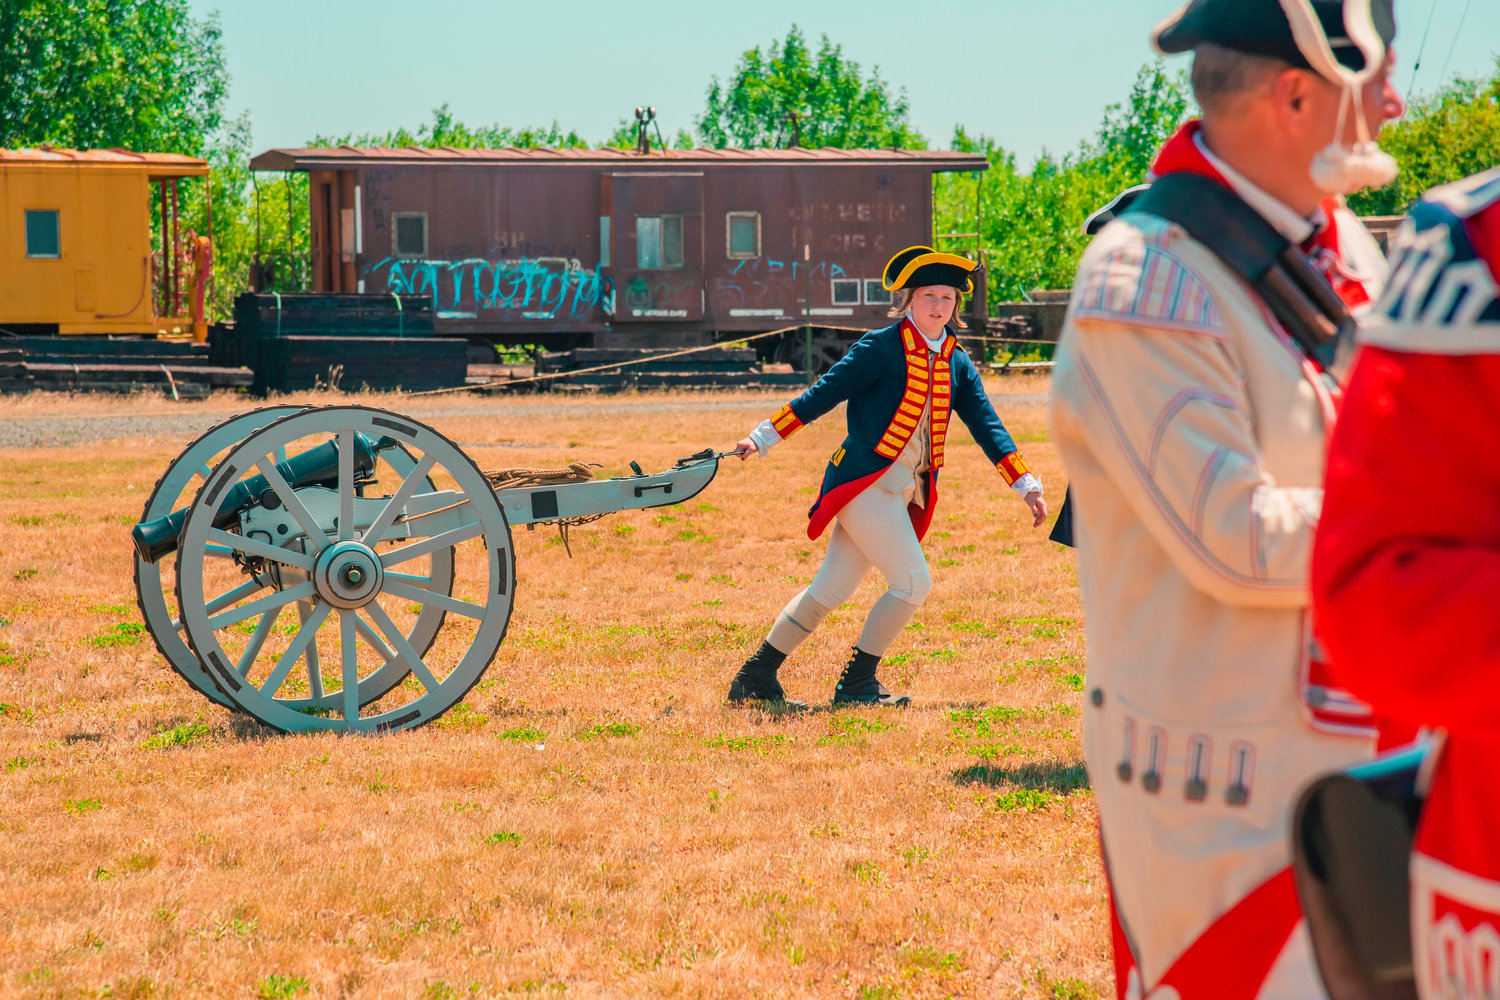 A cannon is carried into a field by the Veterans Memorial Museum during an American Revolutionary War reenactment in Chehalis Saturday afternoon as part of 1776 Day celebrations.